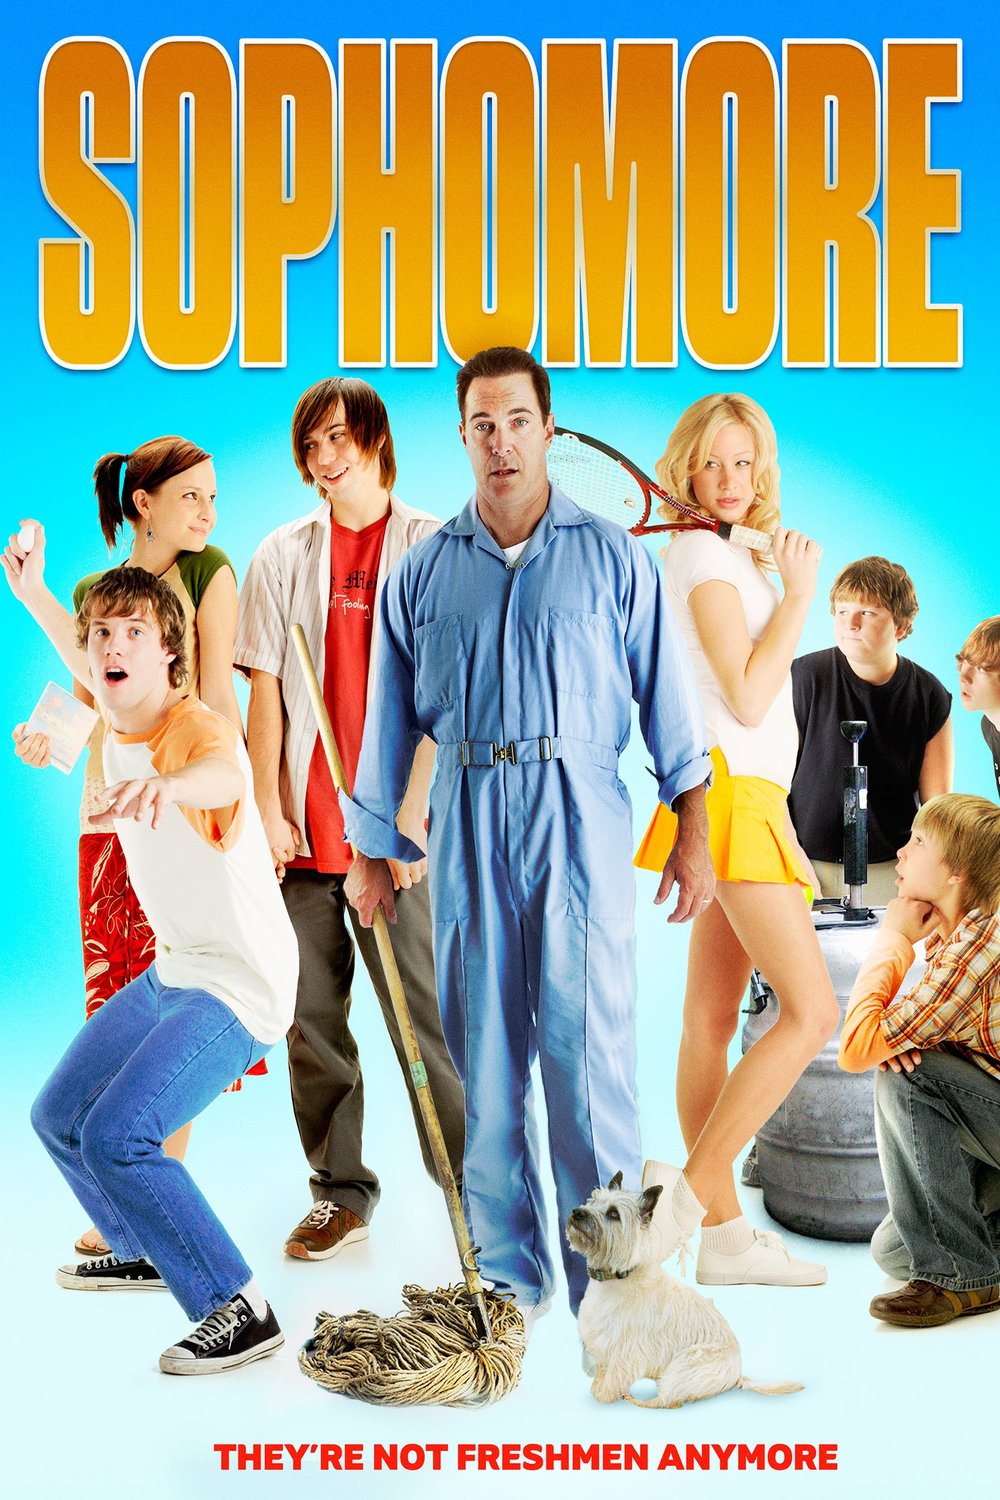 Poster of the movie Sophomore